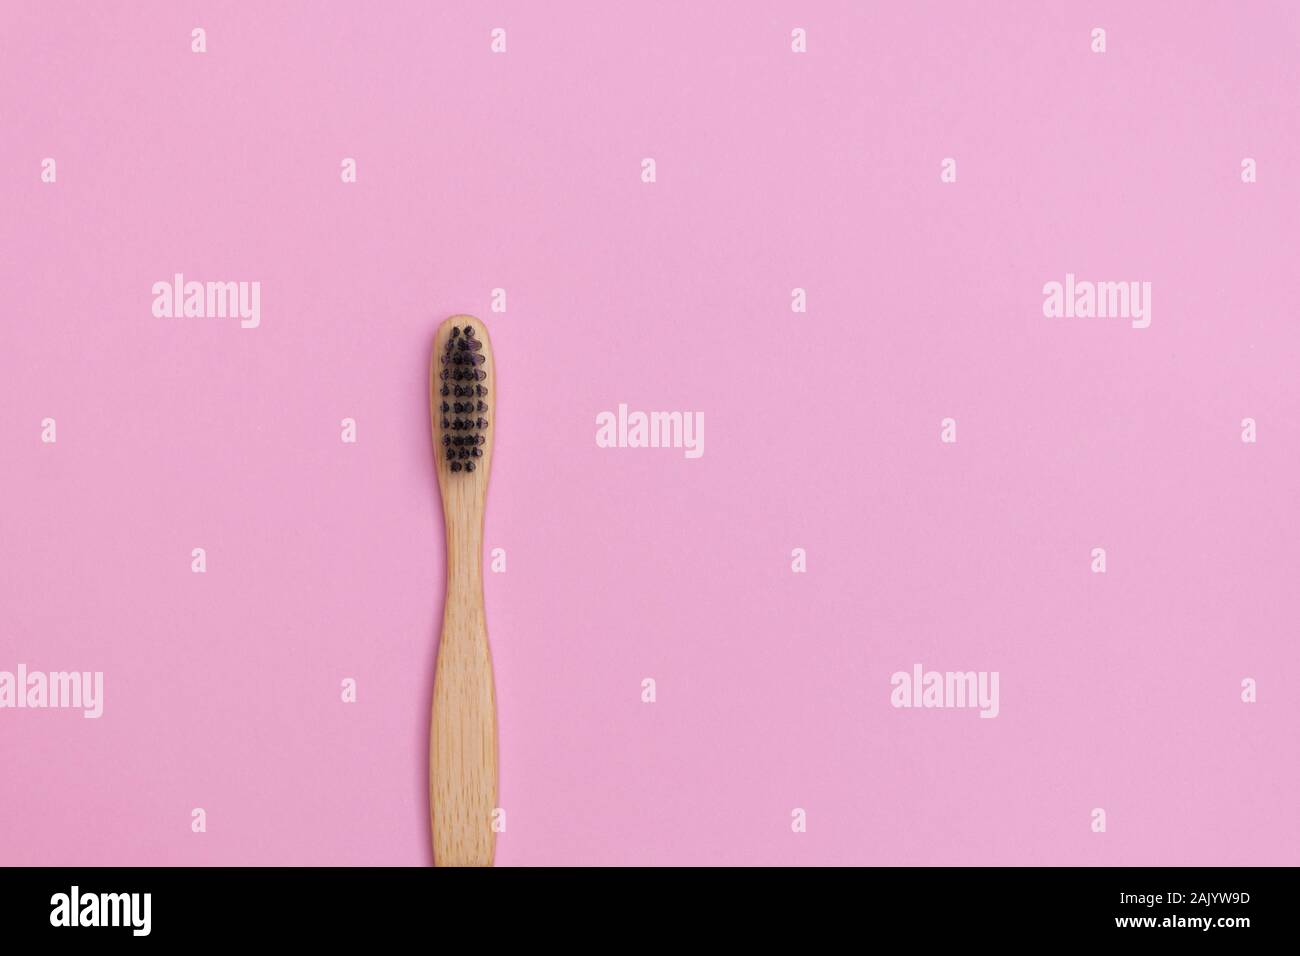 Top view of eco-friendly bamboo toothbrush on soft pink background Stock Photo